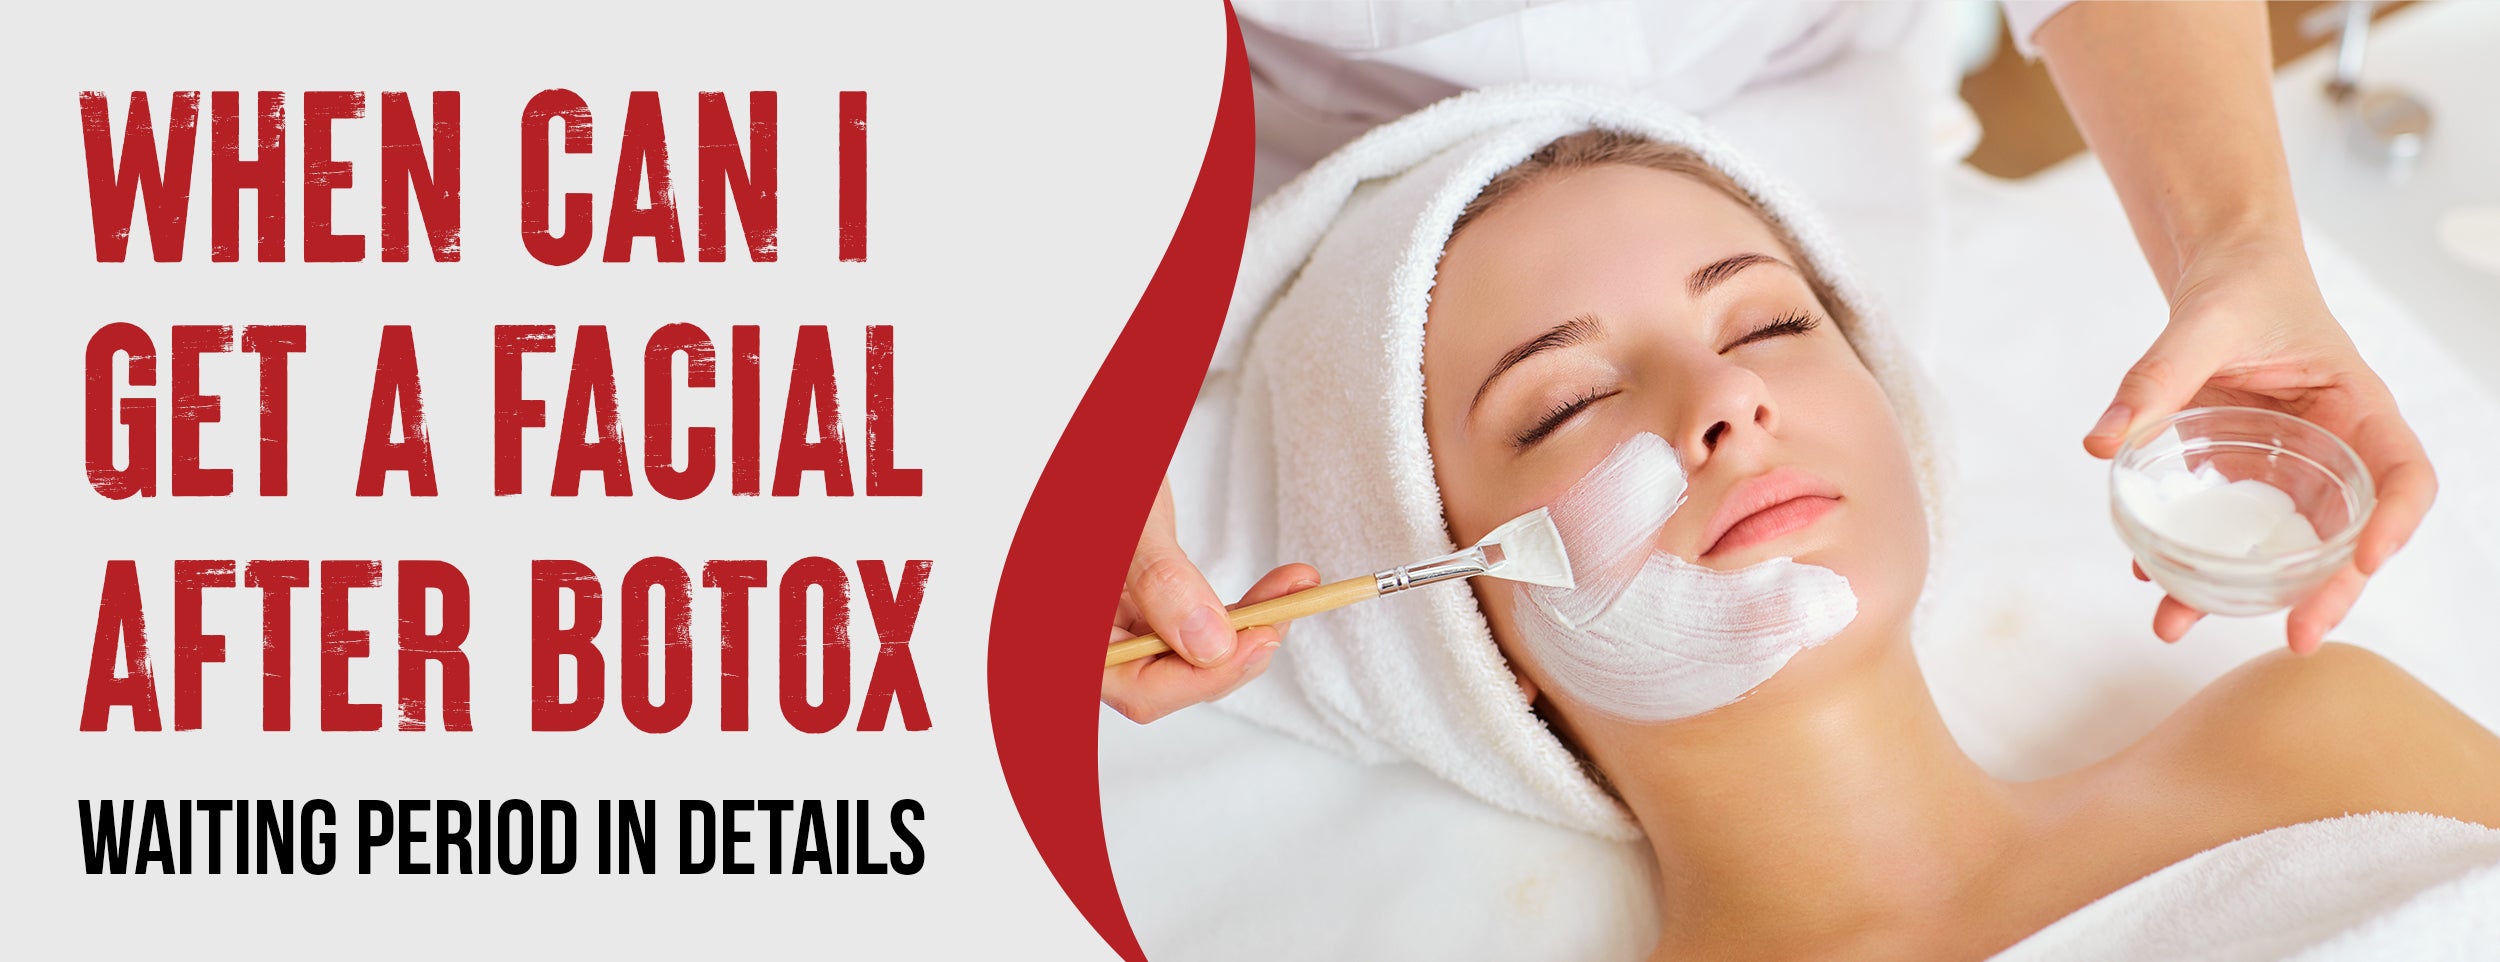 Waiting times and factors when getting a facial after Botox